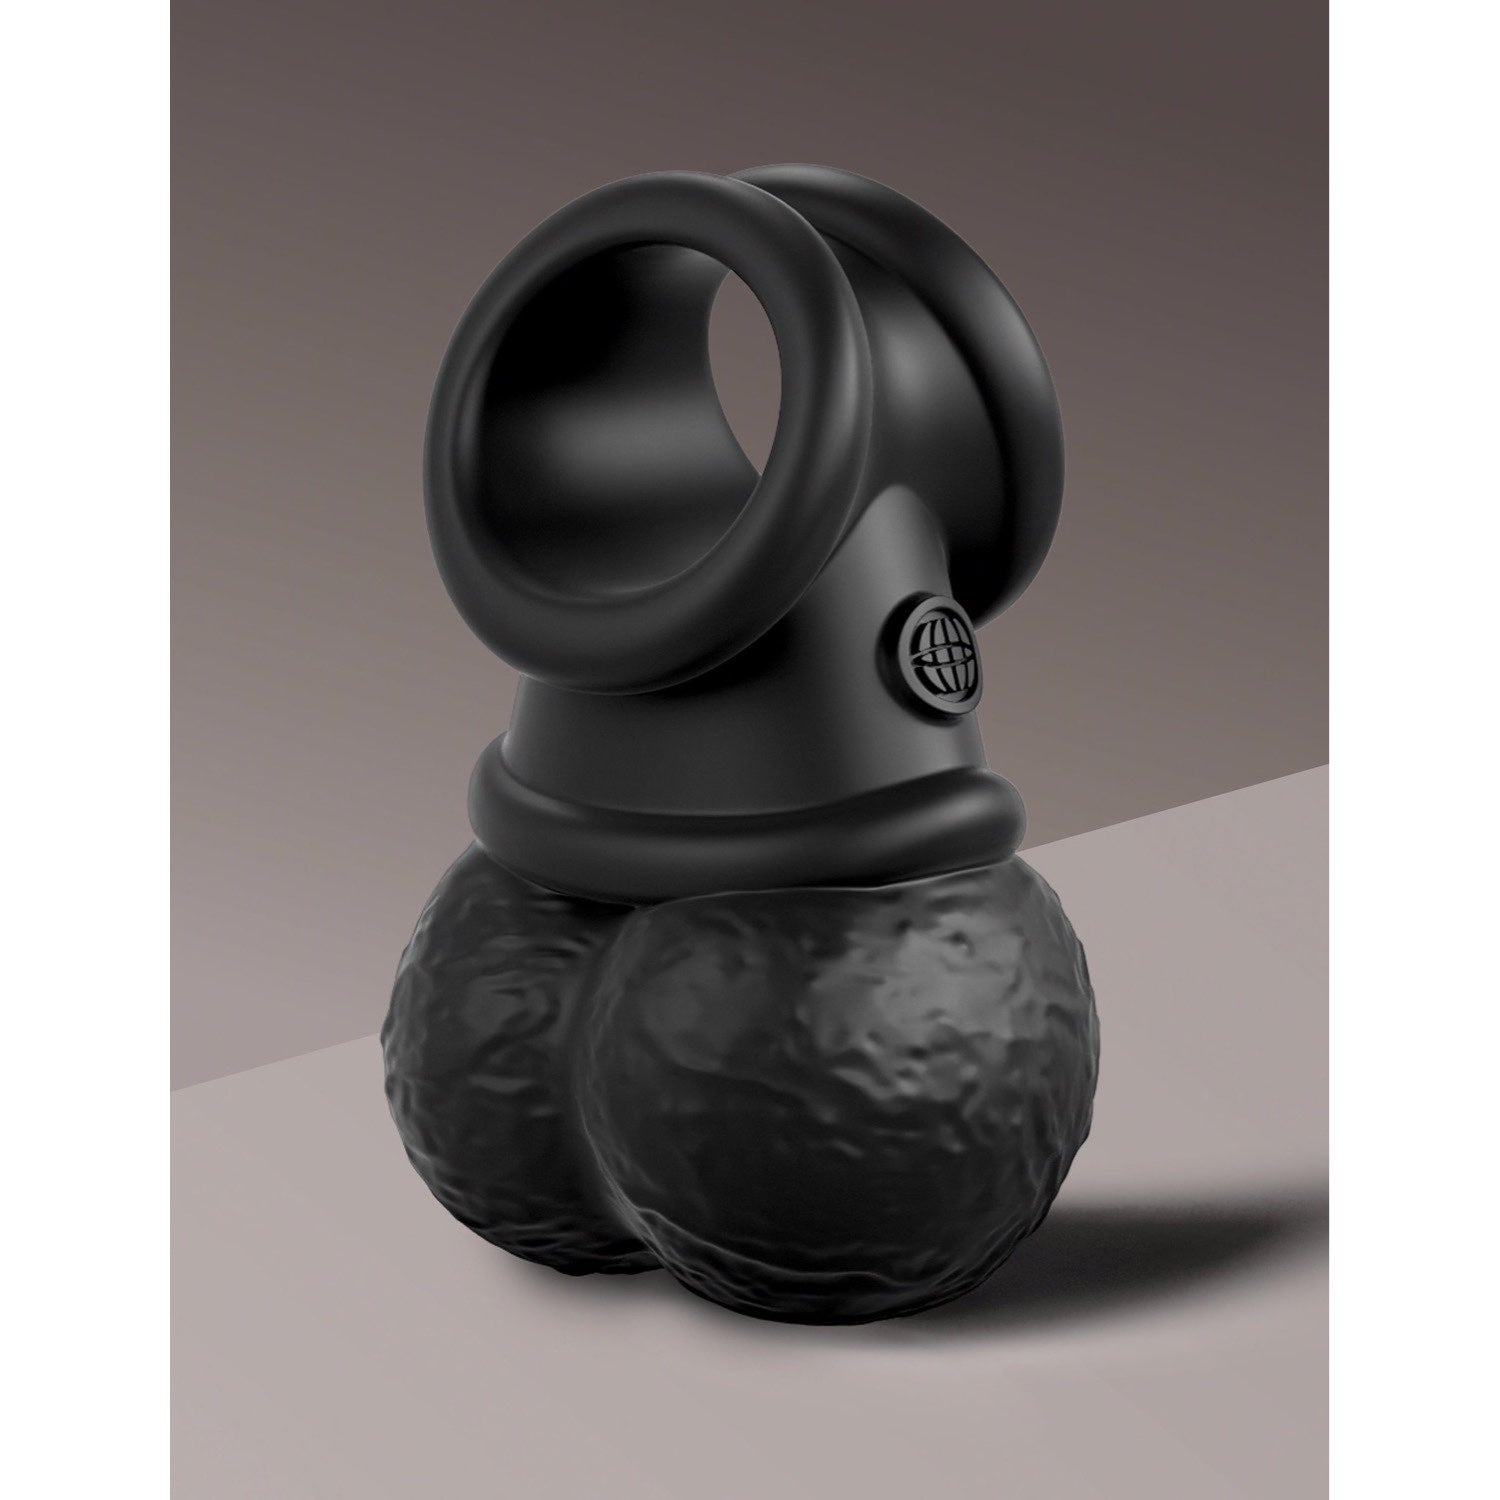 King Cock Elite The Crown Jewels Vibrating Silicone Balls - Black USB Rechargeable Vibrating Cock Ring by Pipedream